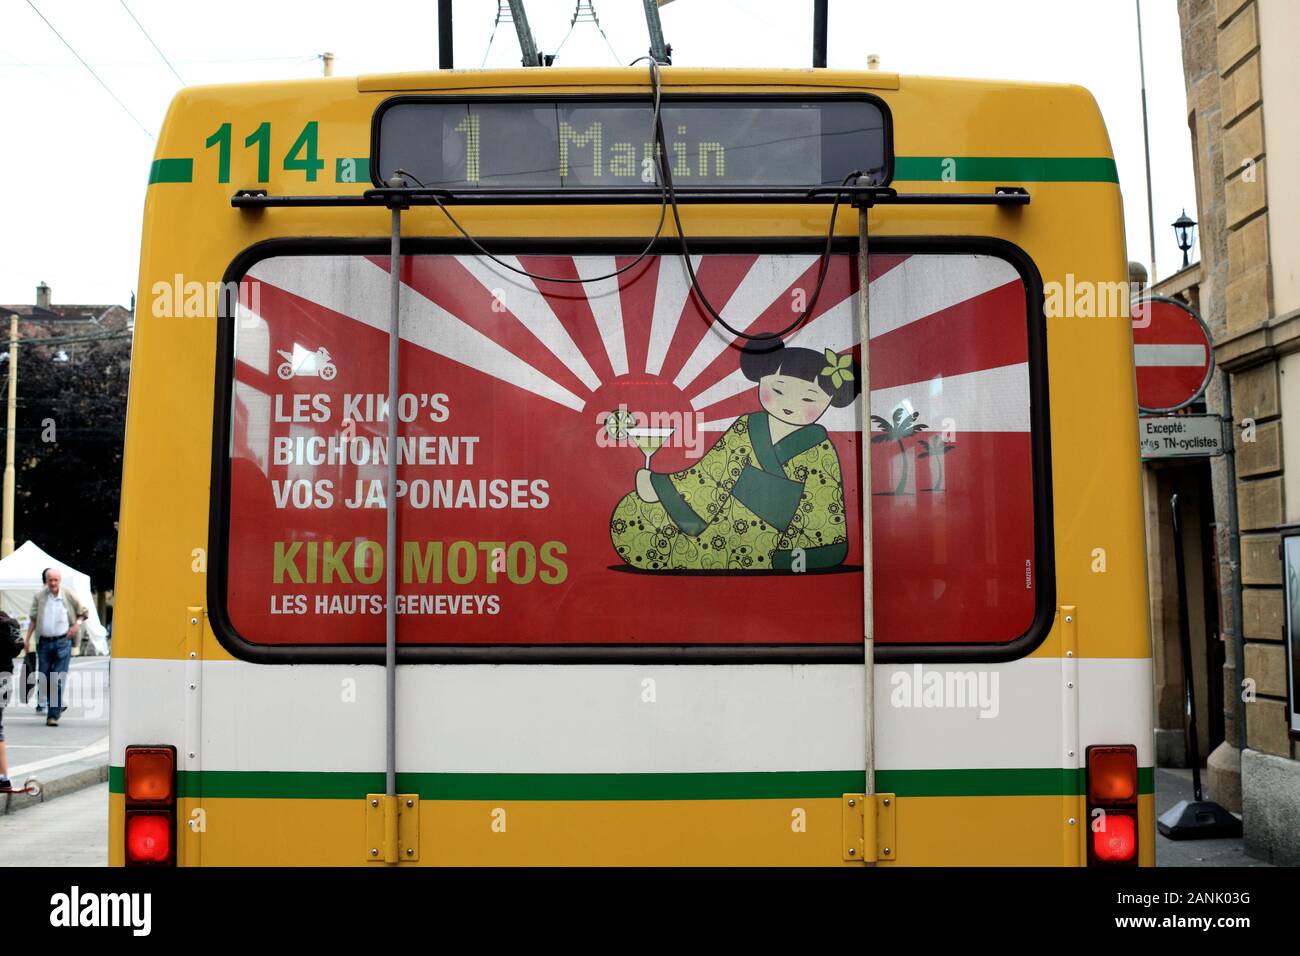 An advert featuring a prominent Japanese-themed rising sun motif on the back of a trolley bus in Neuchatel, Switzerland. Stock Photo